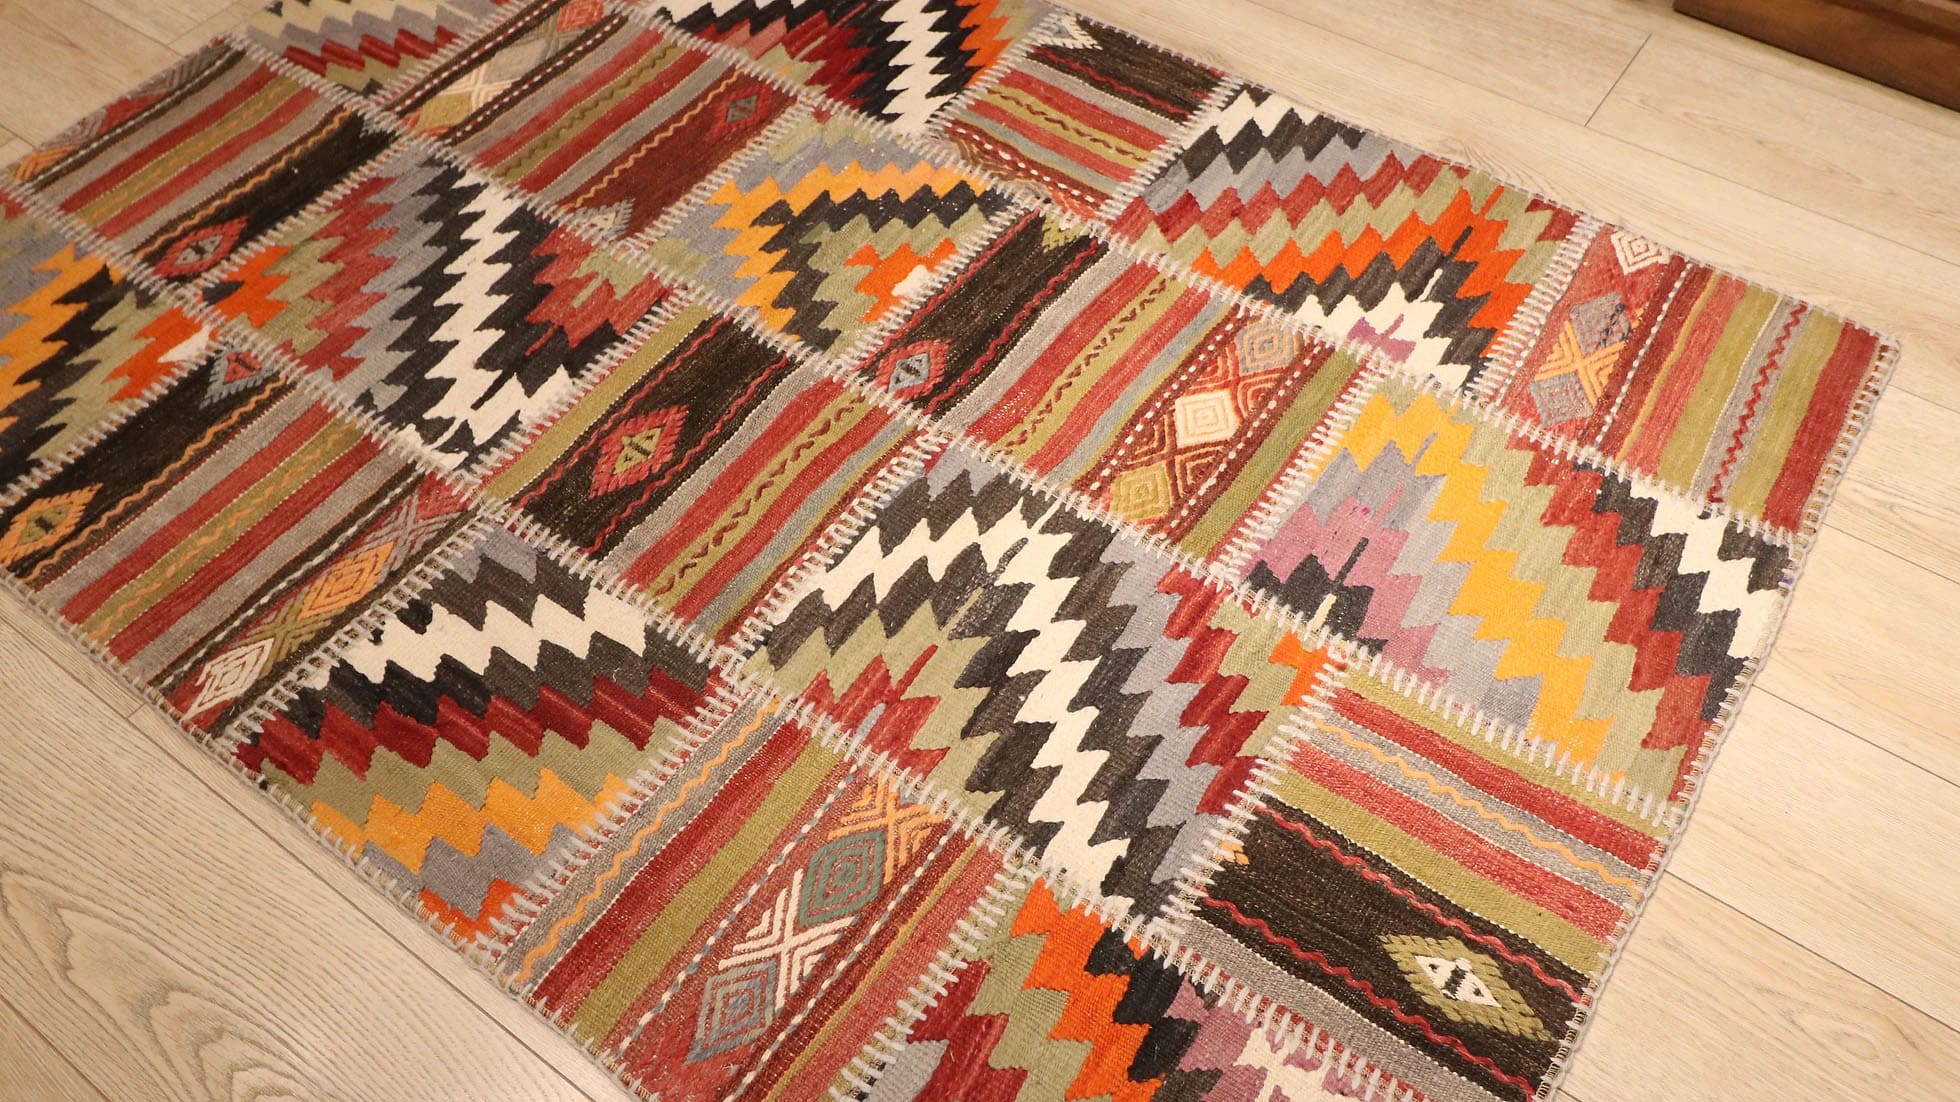 a beautiful and precious semi-antique tribal patchwork flat-weave rug in muted and faded hues in geometric stripes